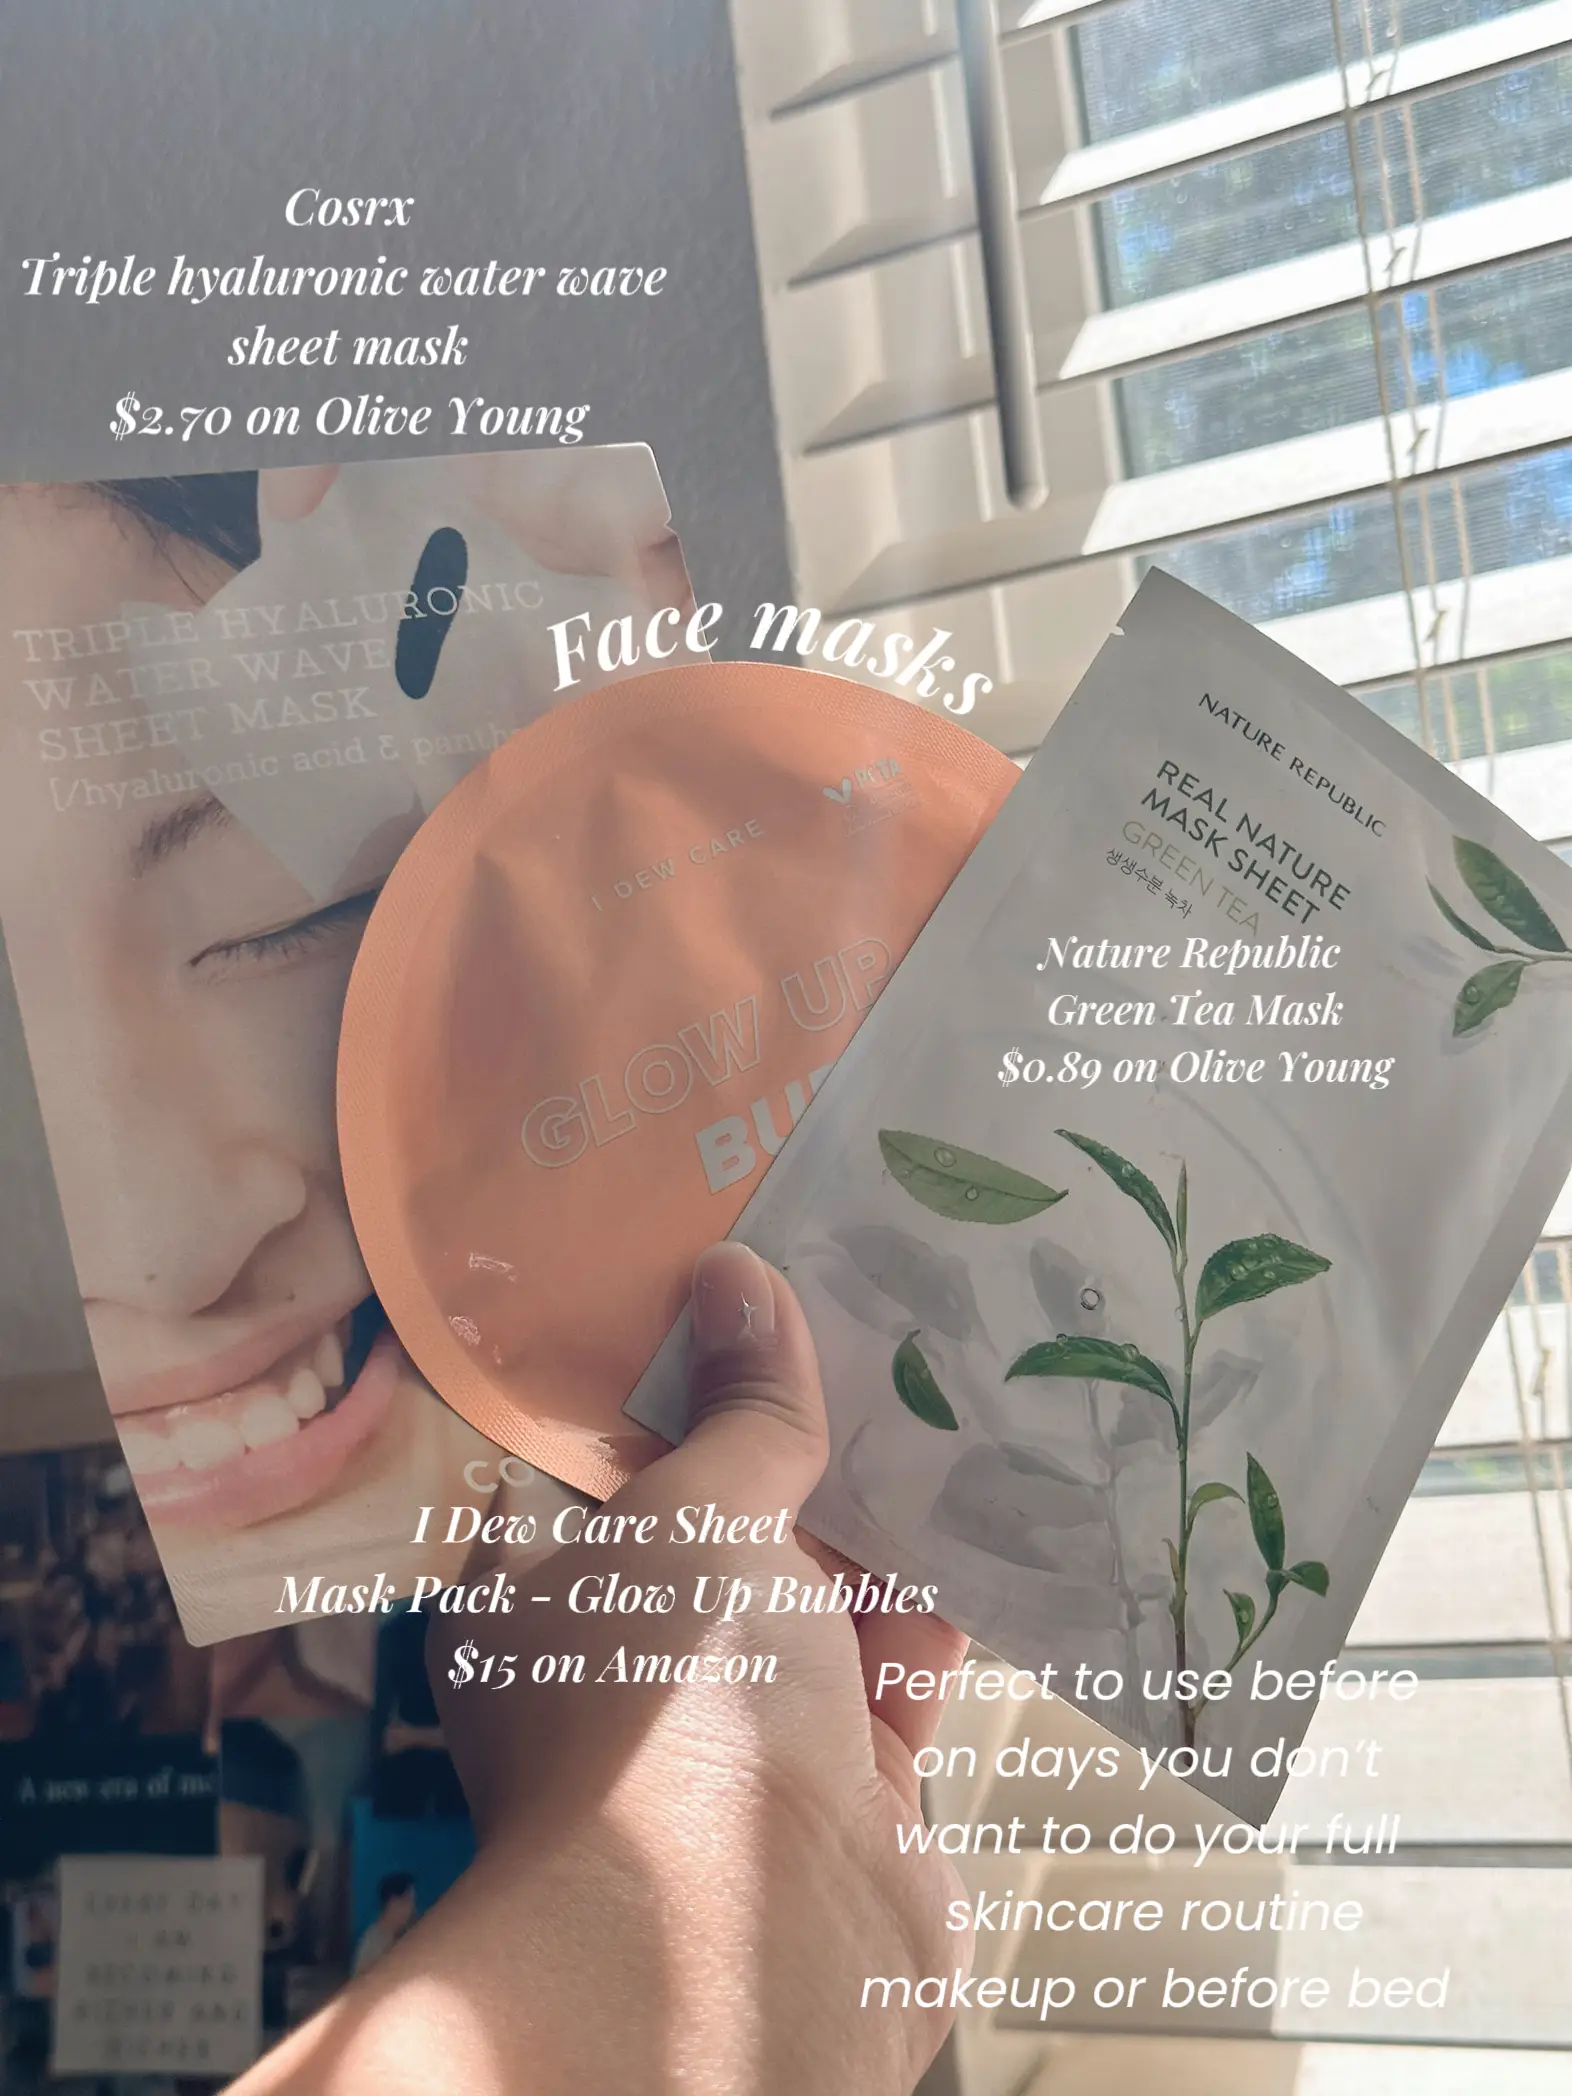  I DEW CARE Sheet Mask Pack - Glow Up Bubbles